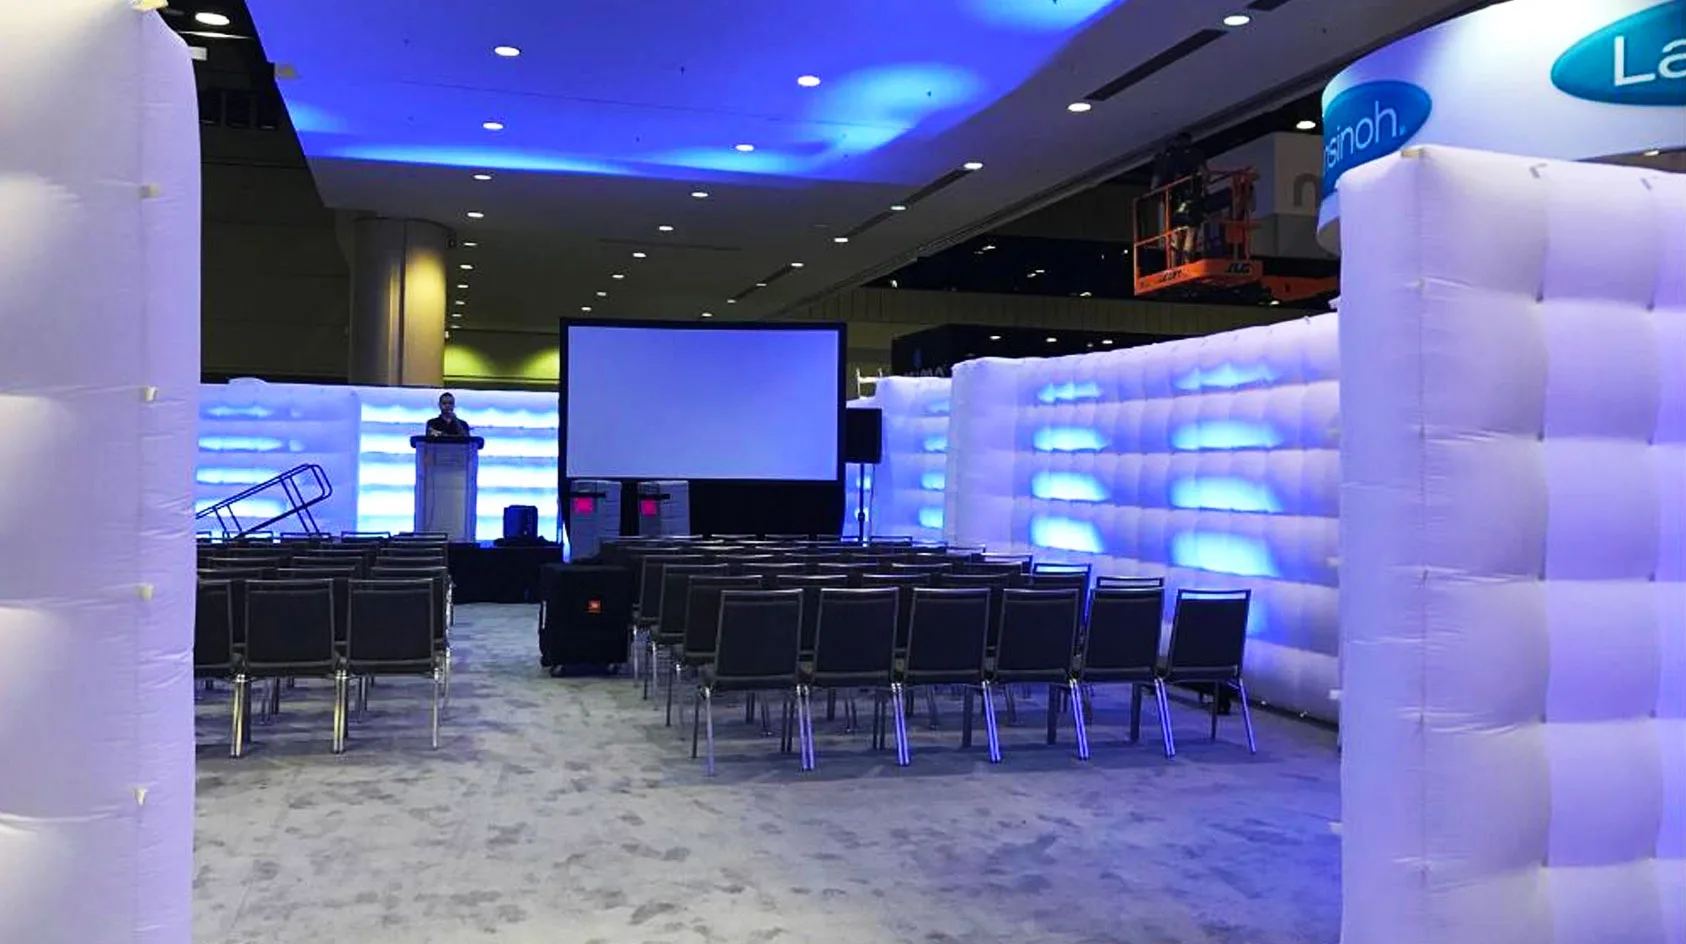 Pic showing several Created By Air Cubewalls used to enclose a presentation area